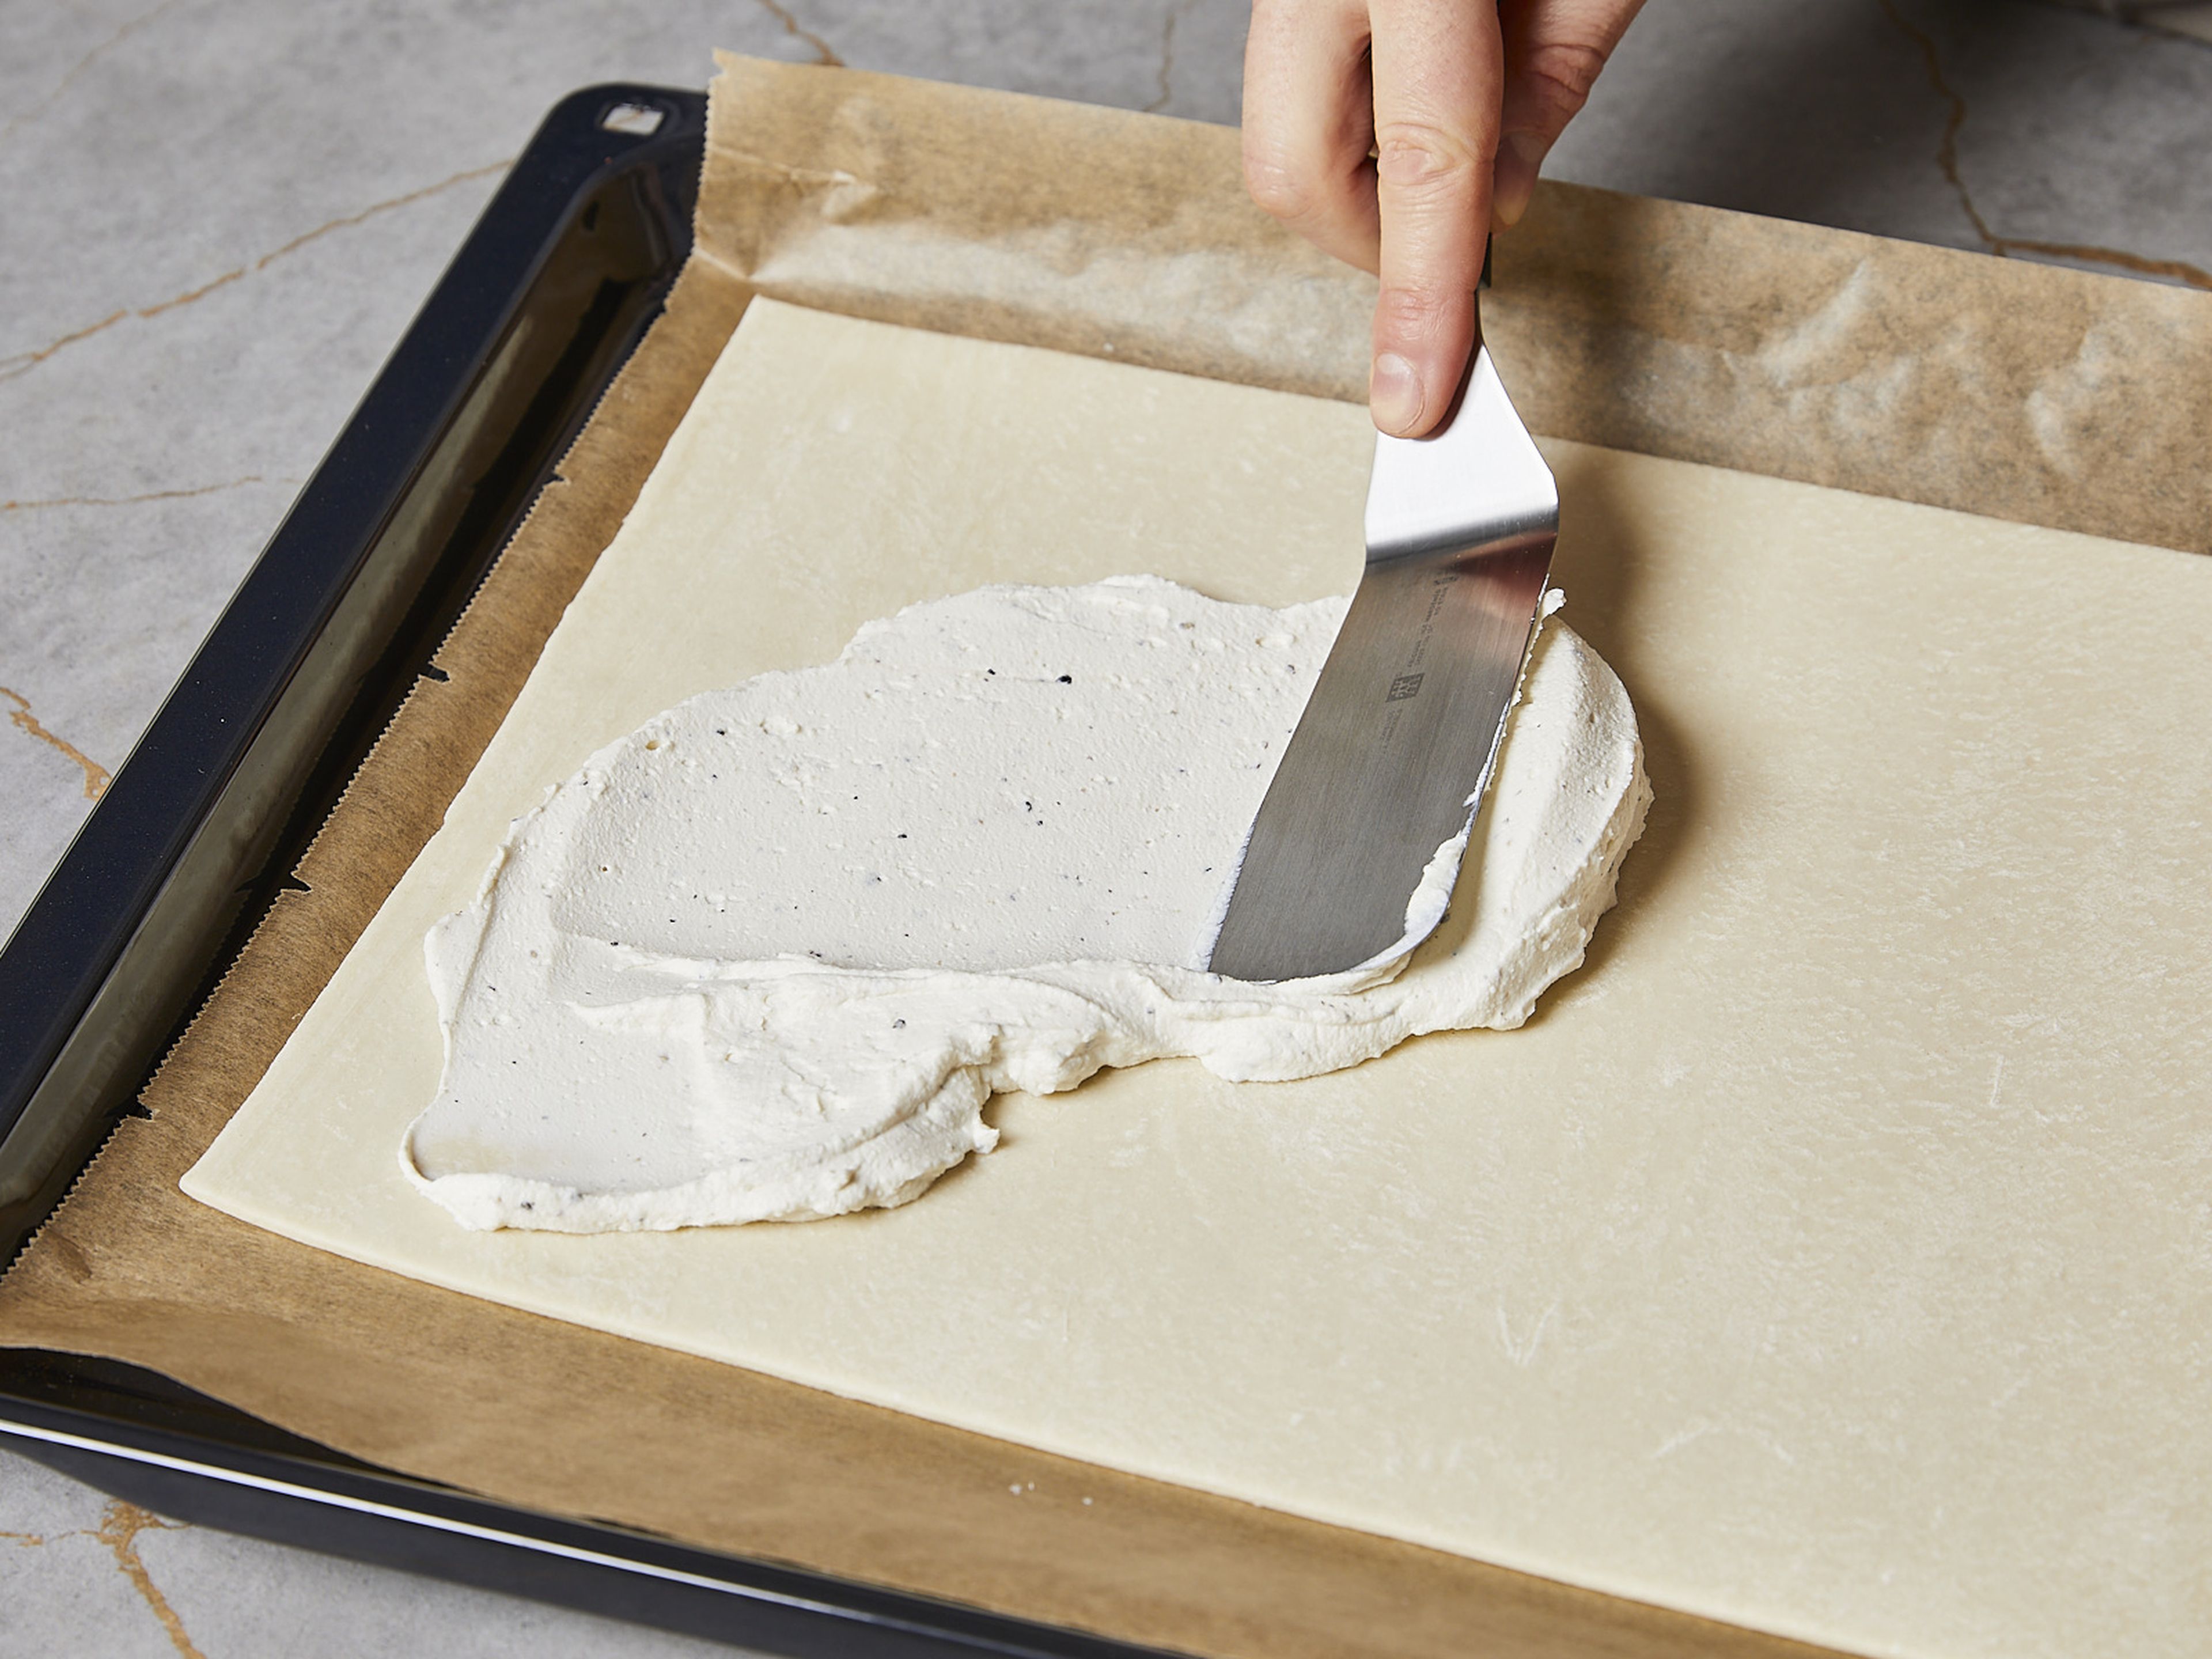 In a small bowl, mix the ricotta with the lemon zest. Season with salt and pepper to taste. Roll out the puff pastry onto a baking sheet lined with parchment paper and spread with the ricotta. Leave an approx. 1.5 cm/0.6 inch wide border free.